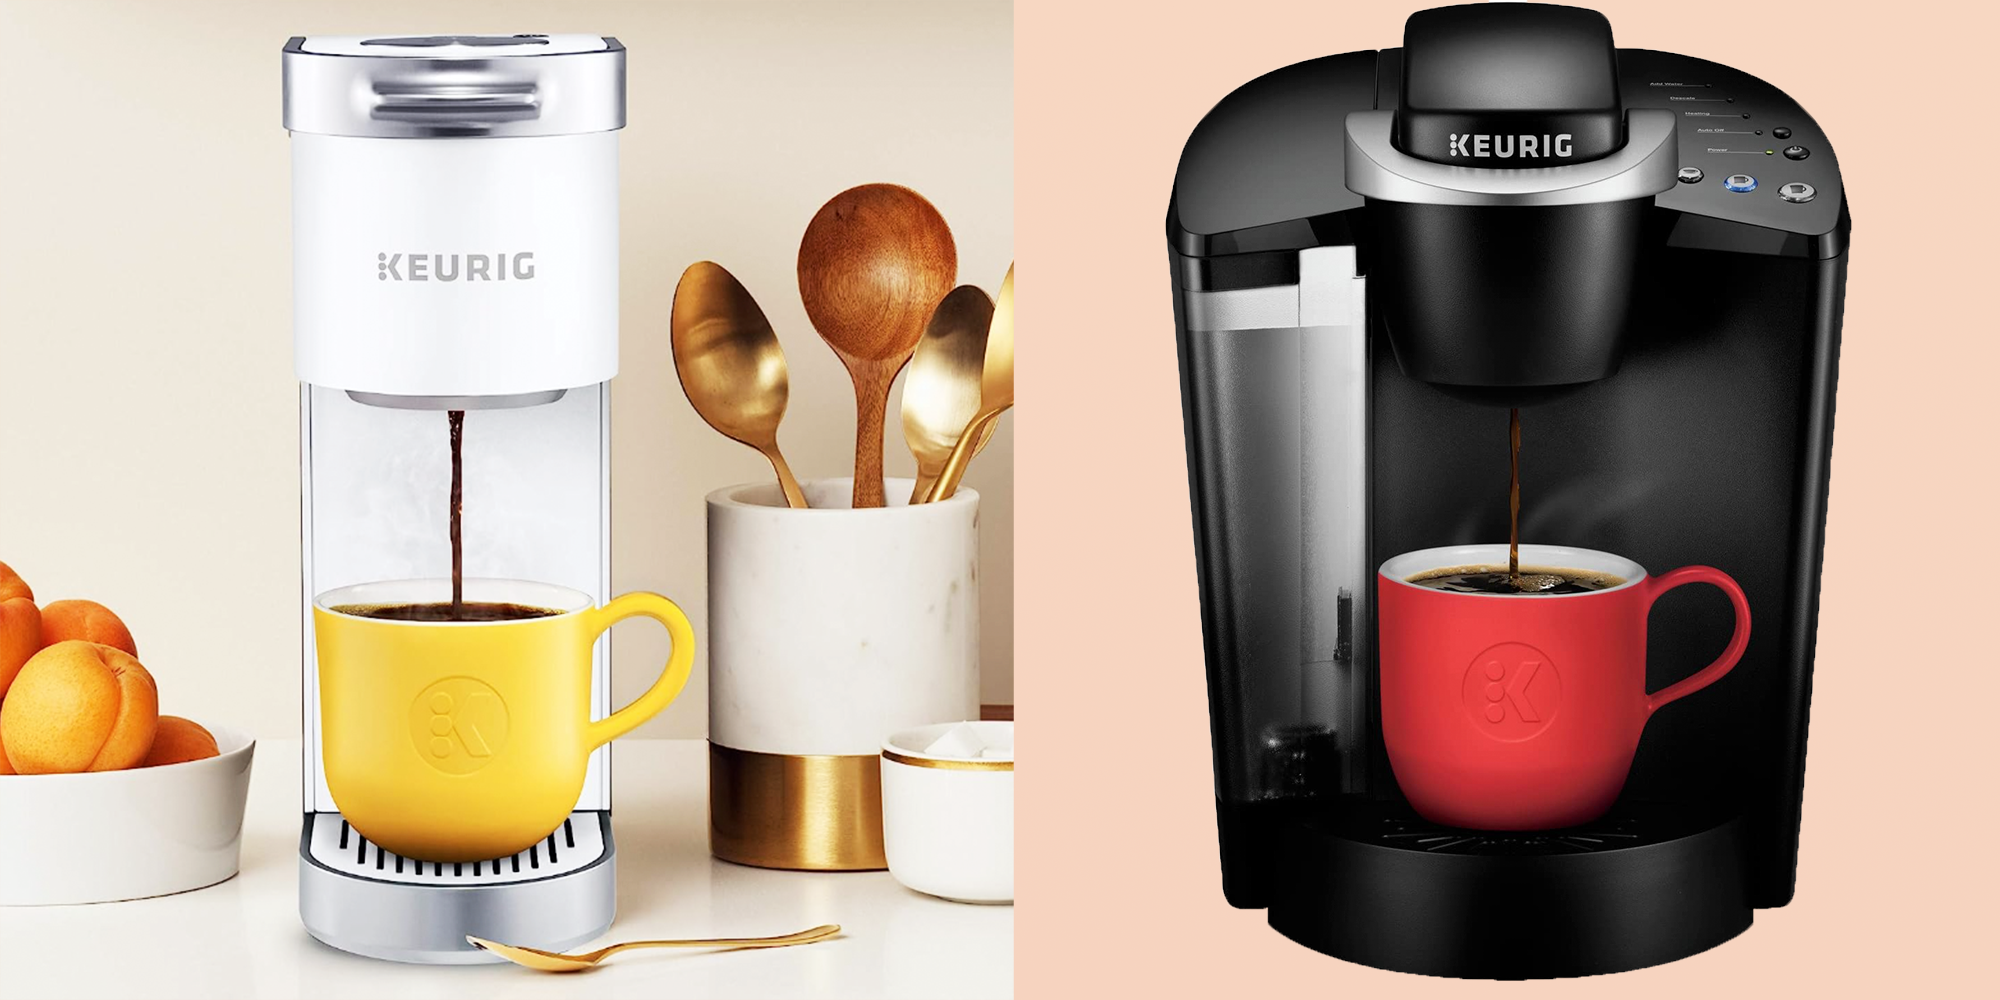 How to Spruce Up an Old Coffee Maker - Organizing & Cleaning Tips